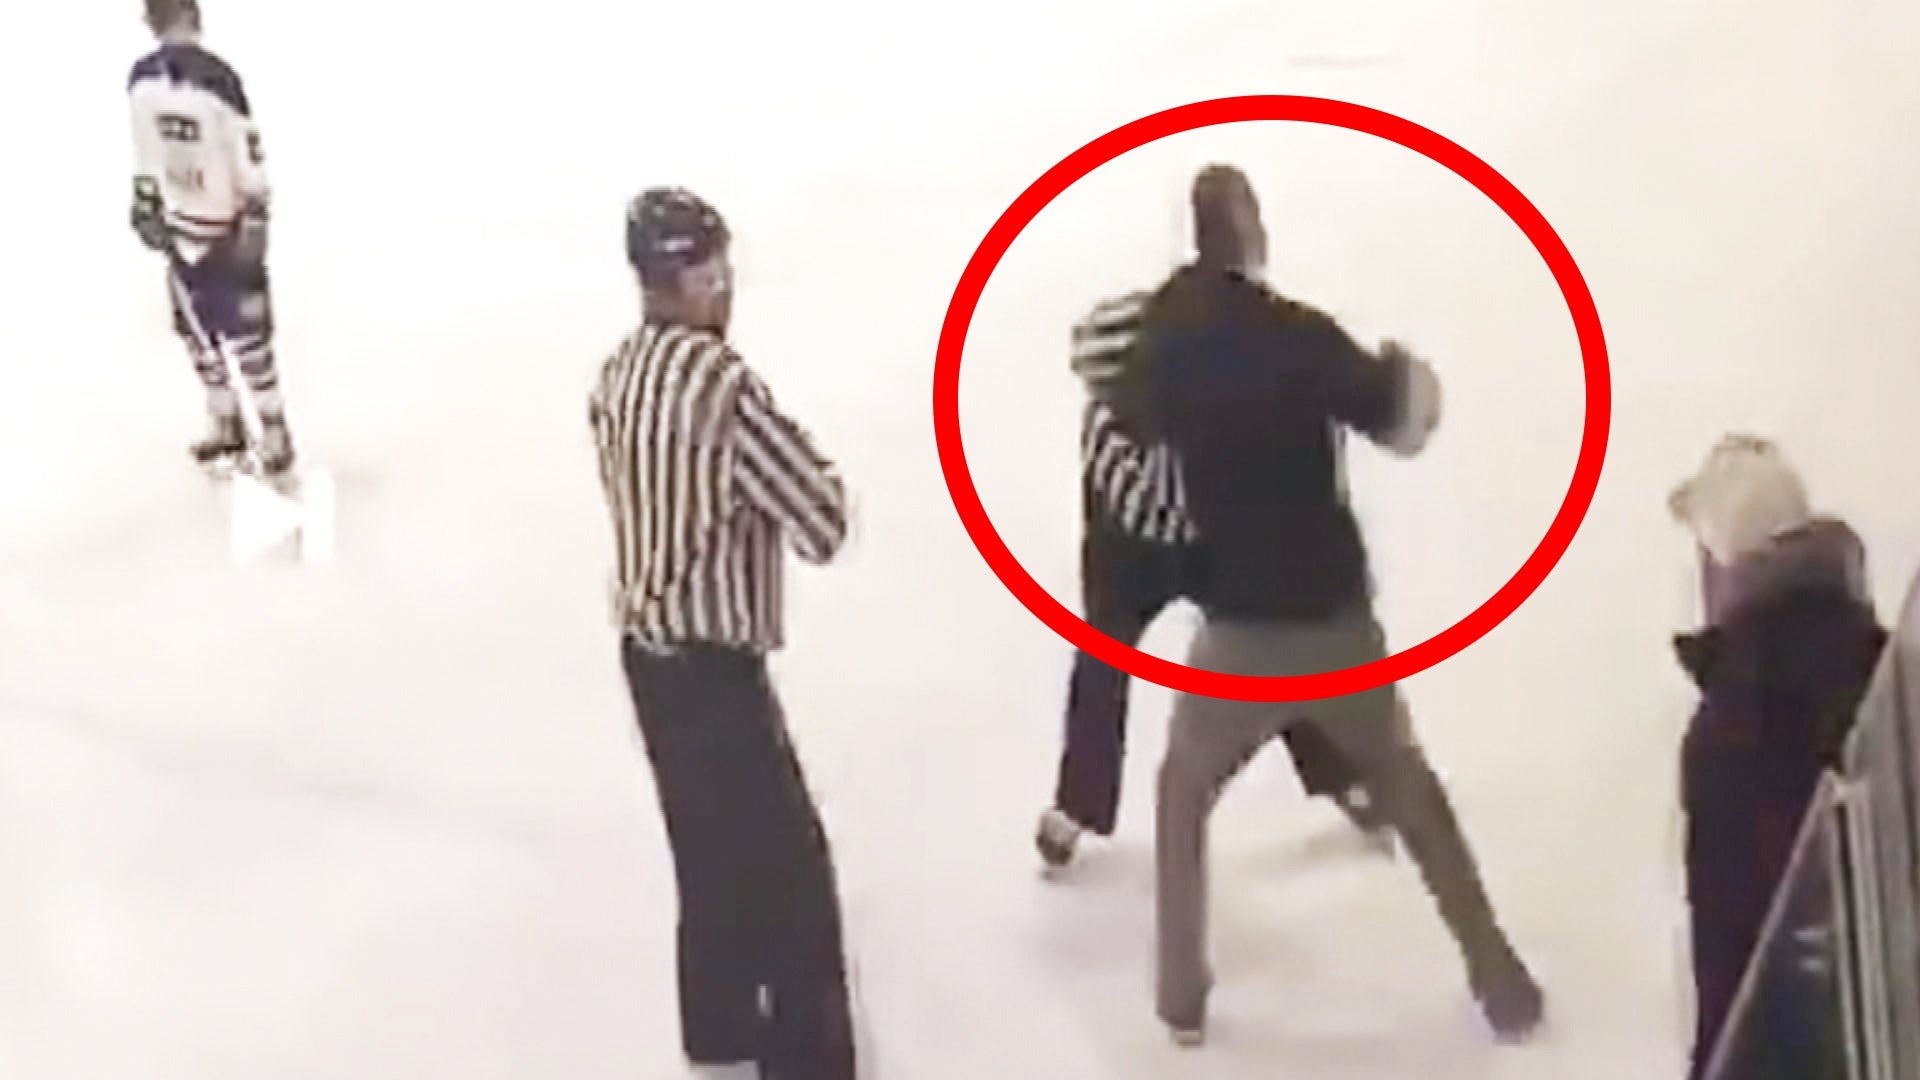 Hockey officials face increase in abuse: top N.S. referee